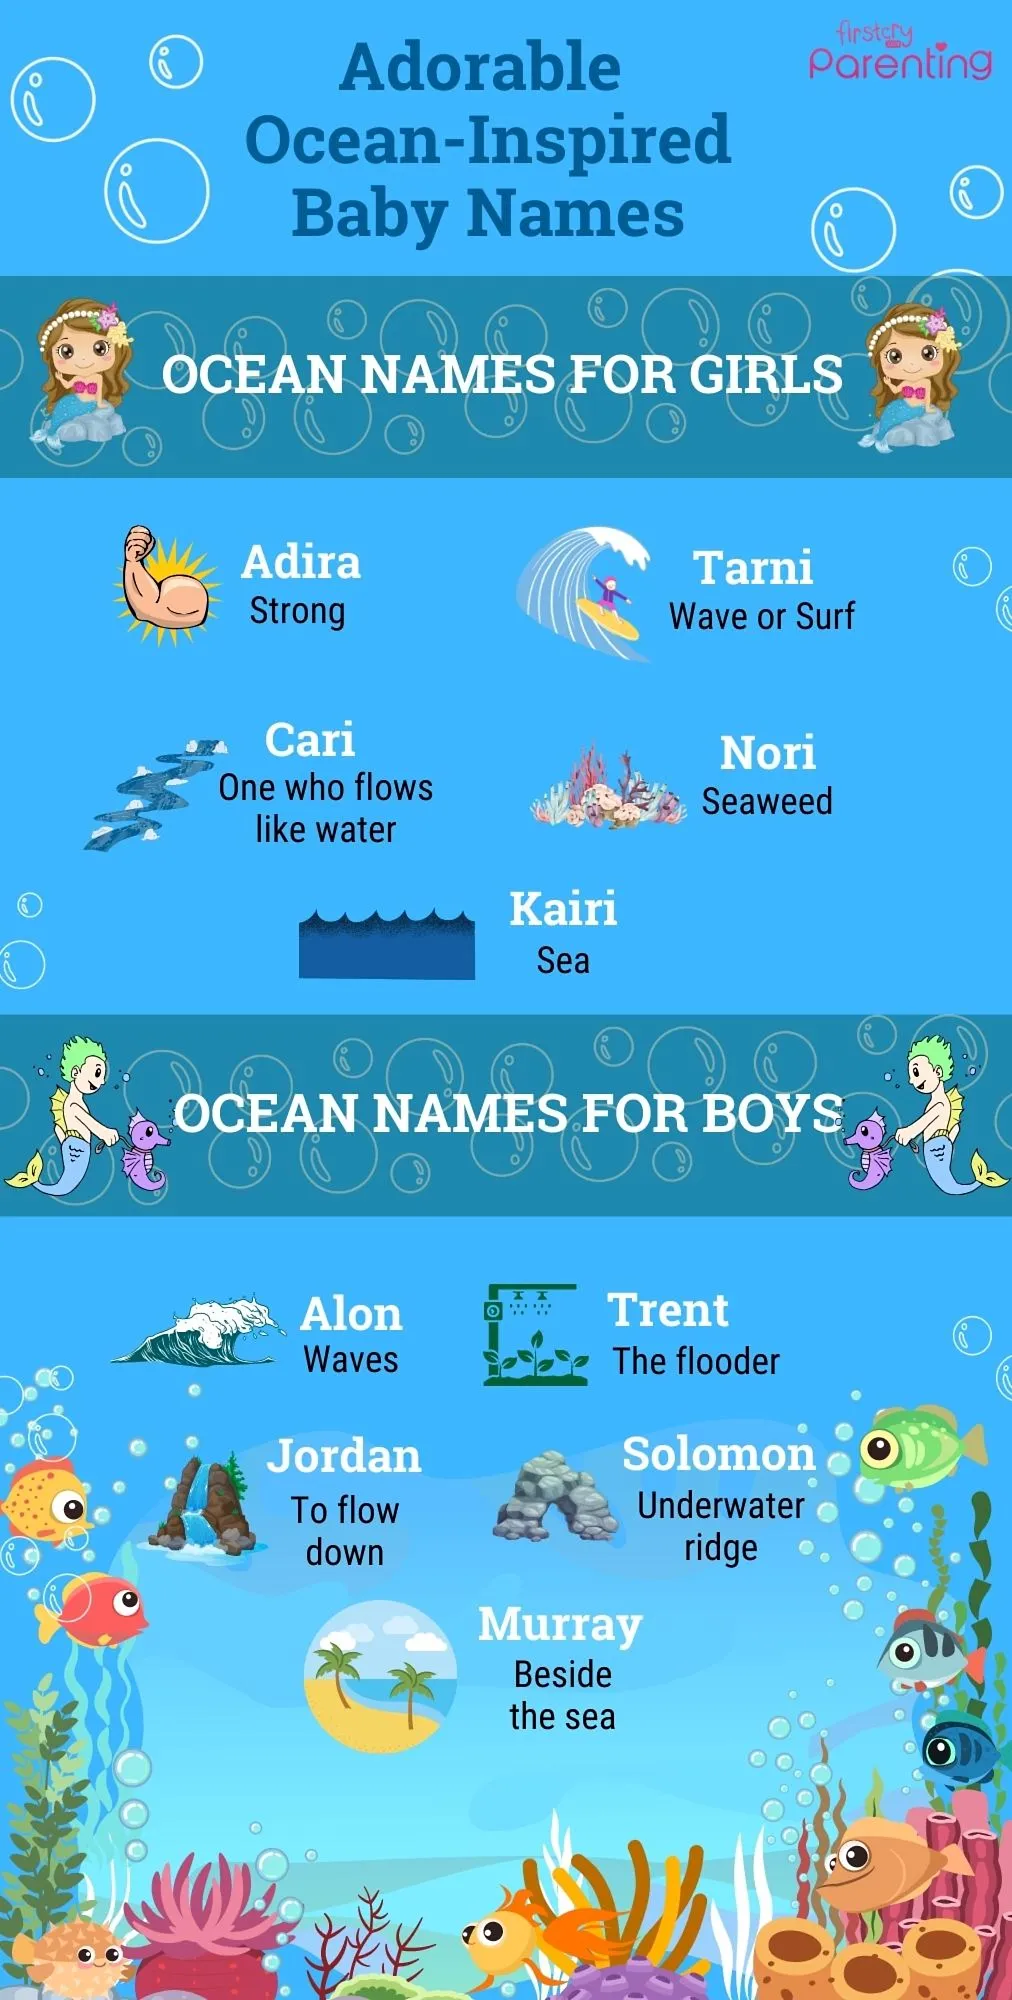 Ocean Names for Baby Boys and Girls - Infographic